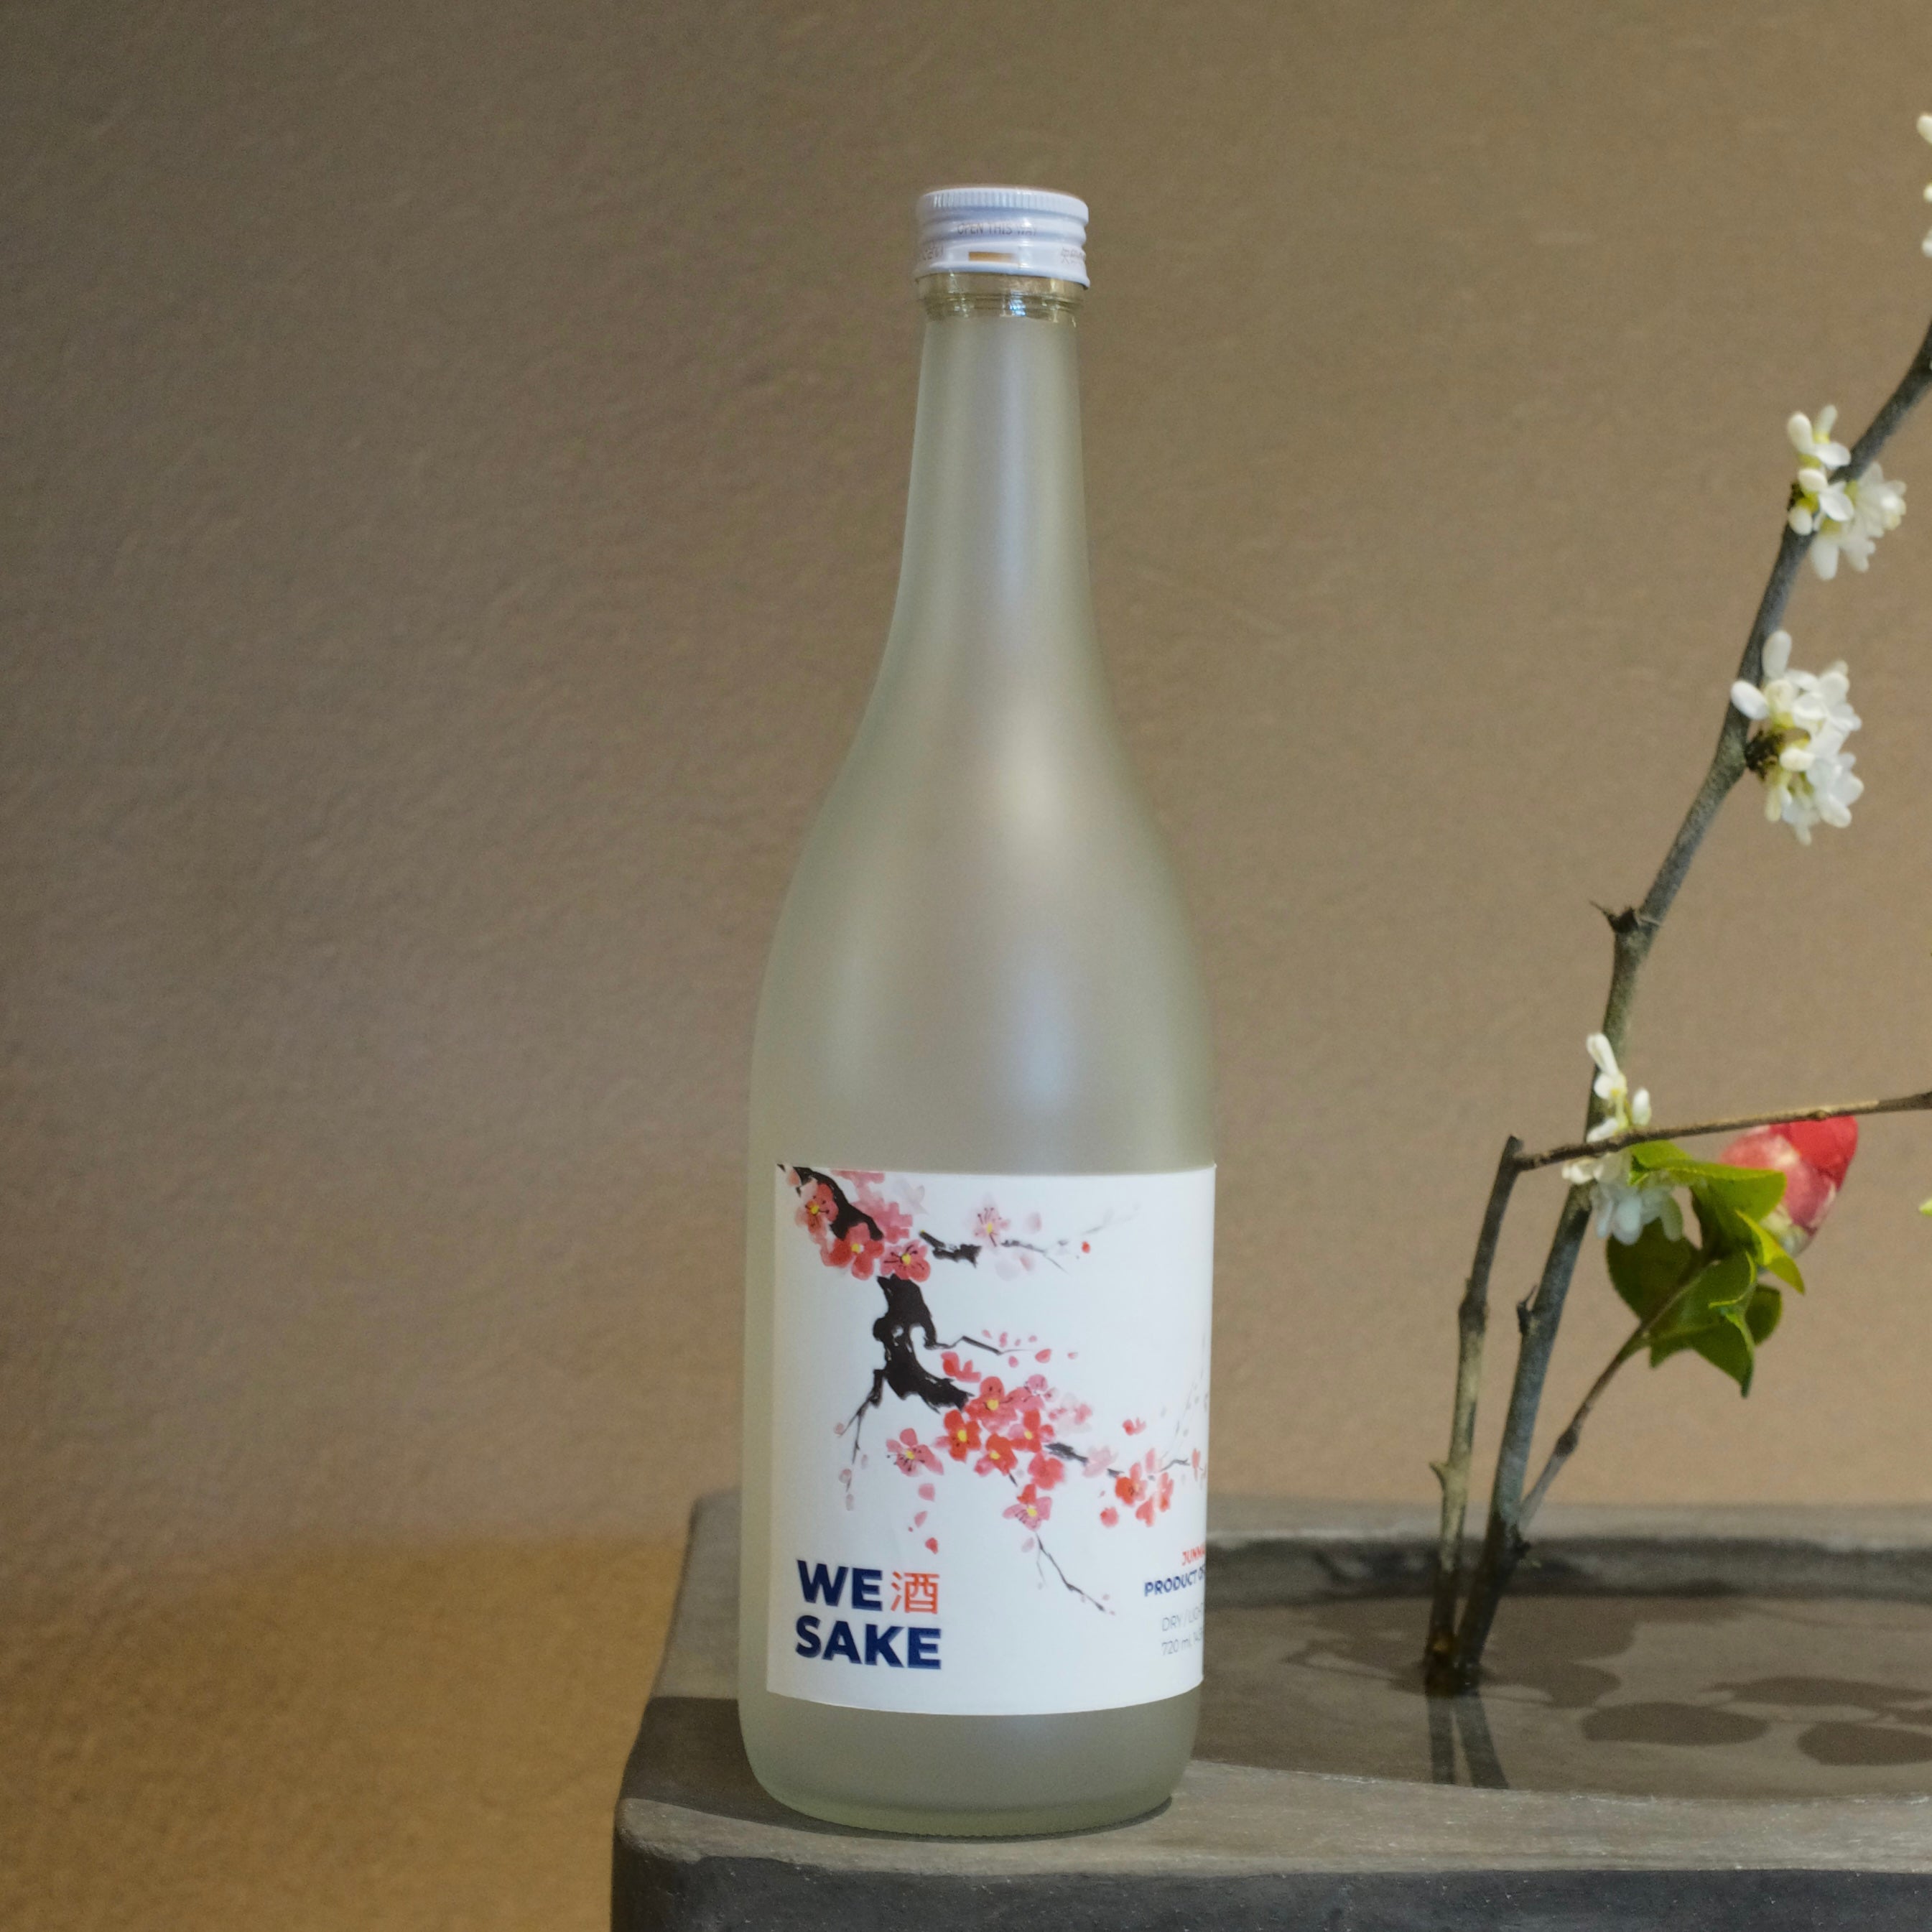 How Long Does Sake Last After Opening?